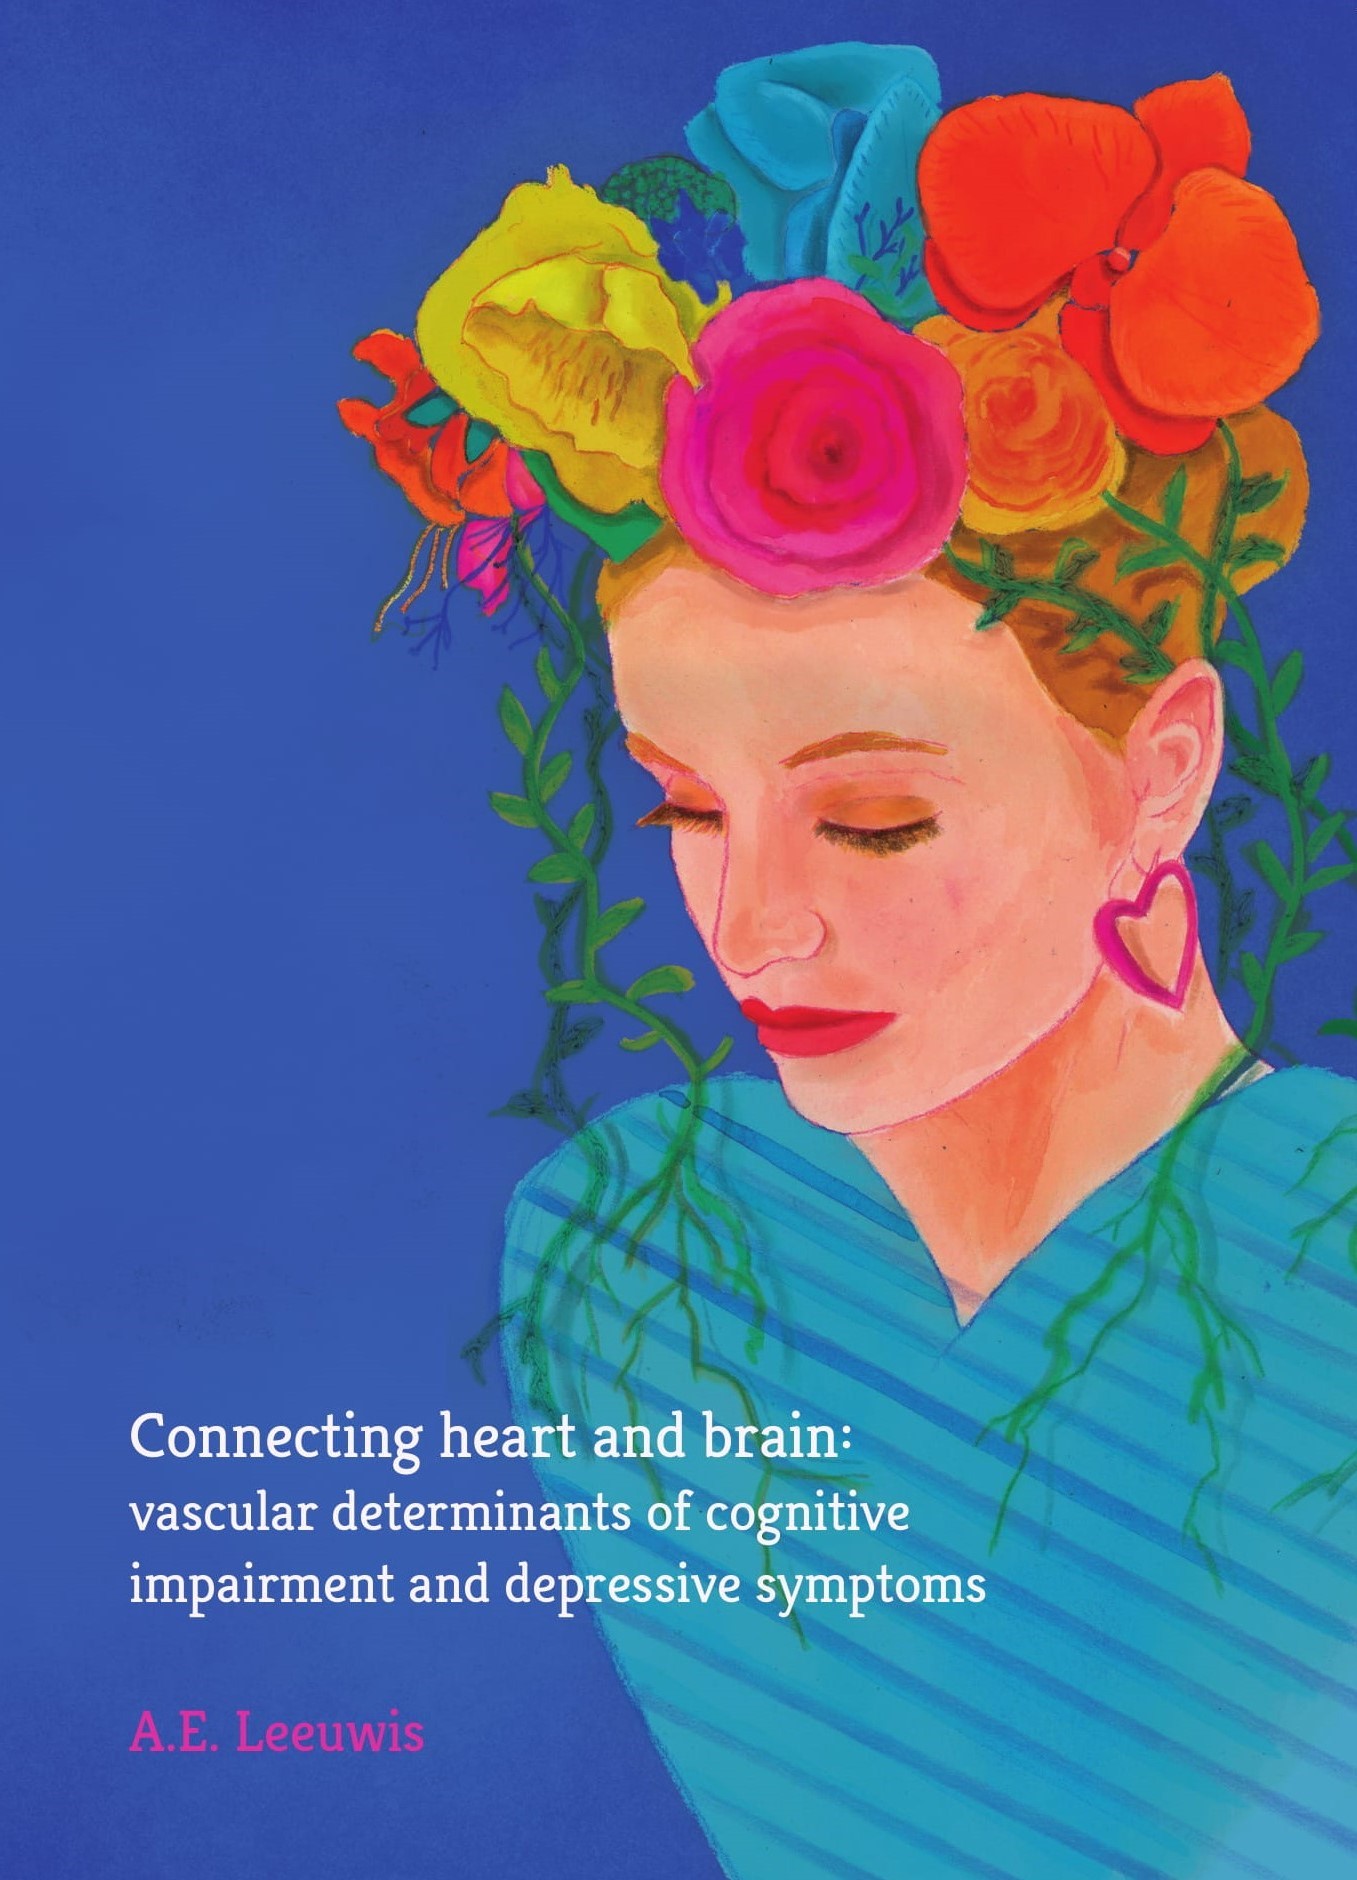 Connecting heart and brain: vascular determinants of cognitive impairment and depressive symptoms door A.E. Leeuwis